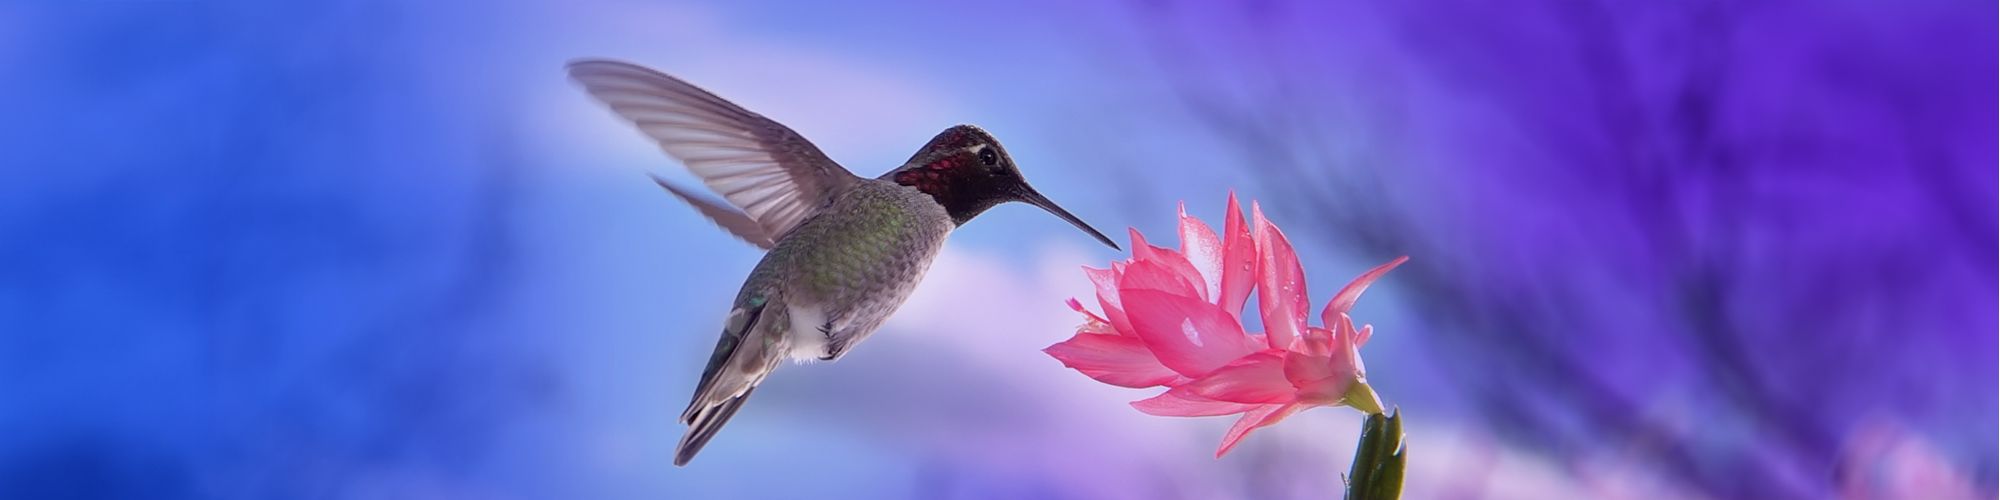 A bird is sipping nectar from a flower